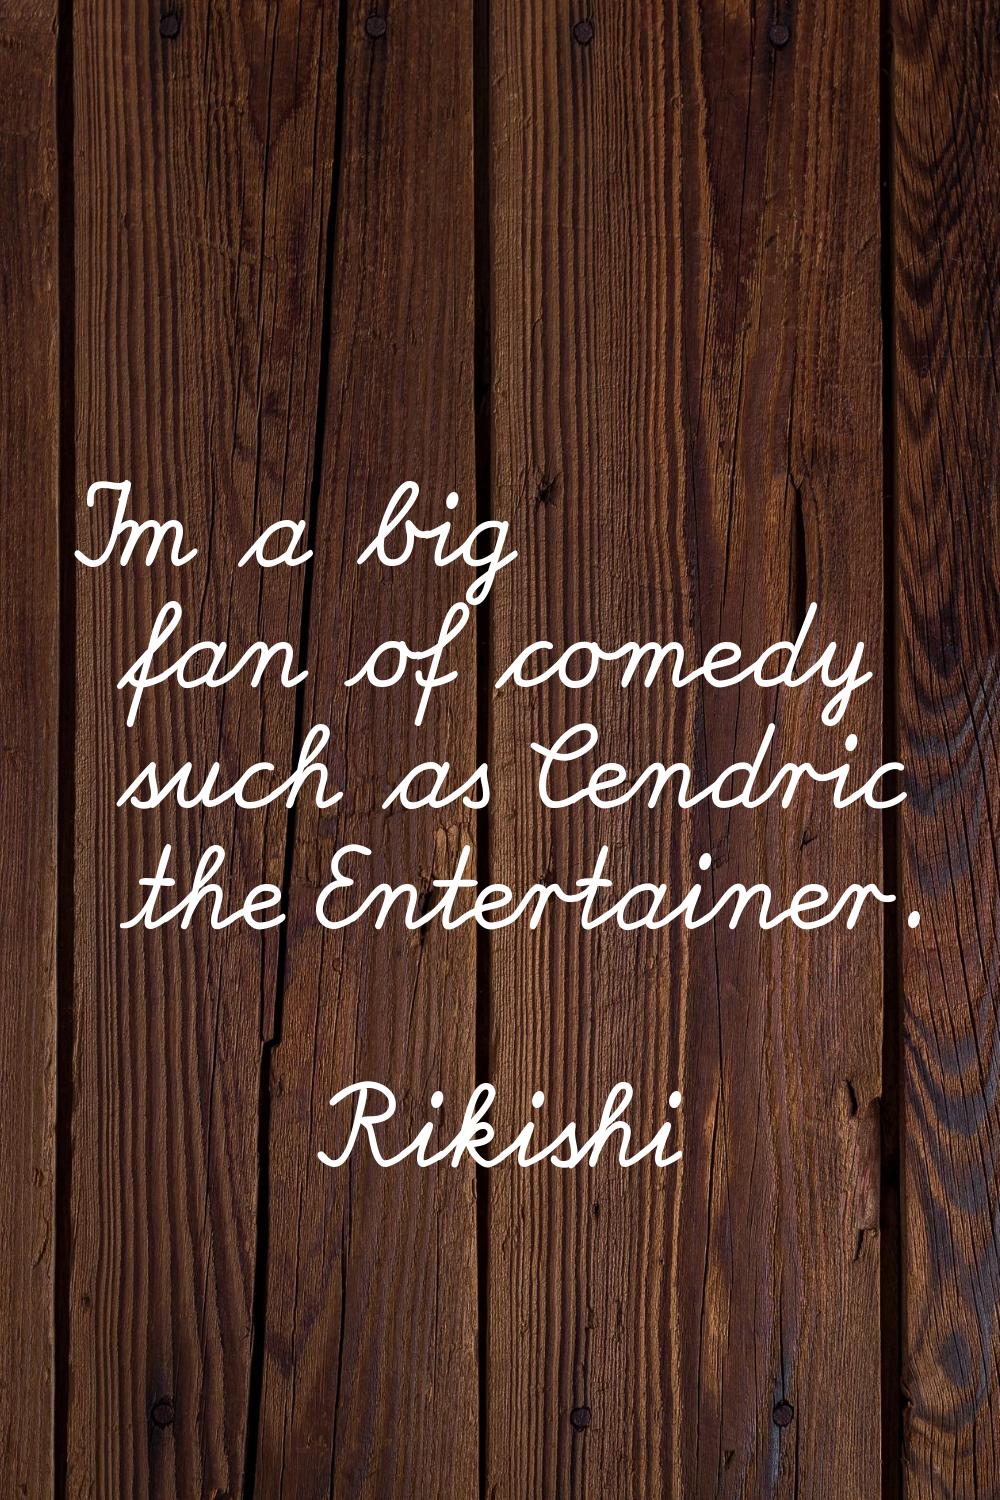 I'm a big fan of comedy such as Cendric the Entertainer.